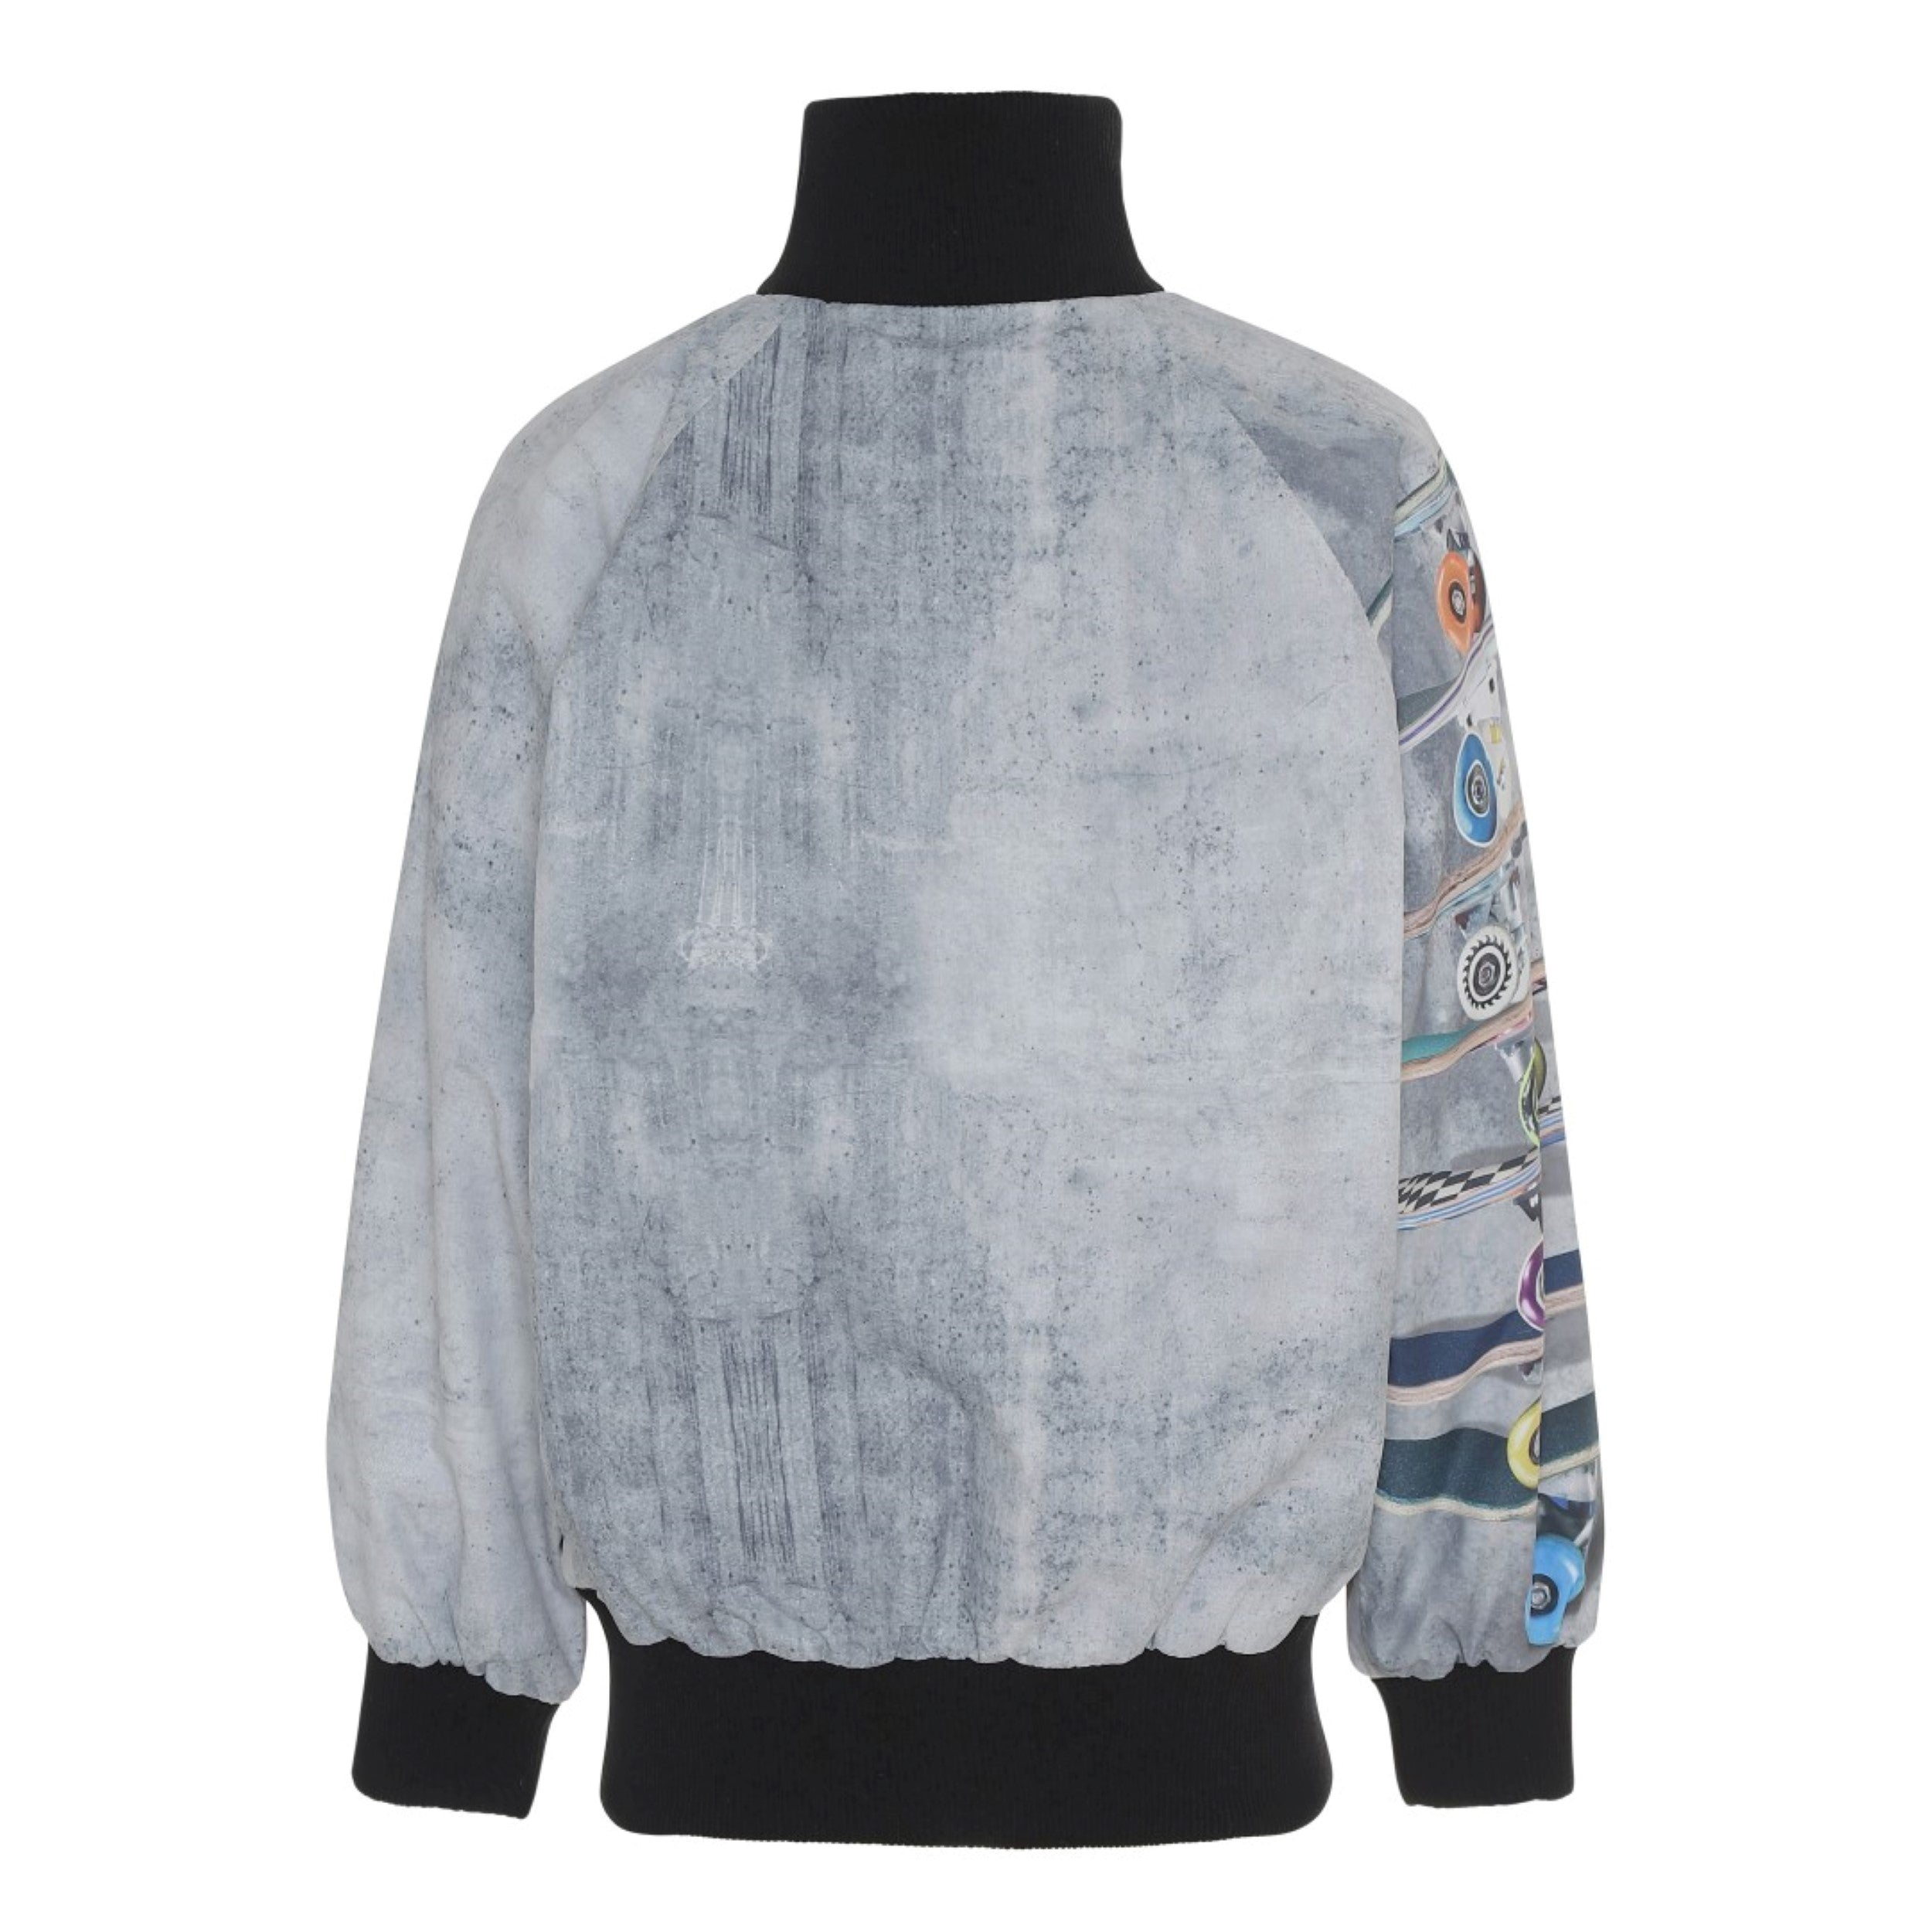 Molo Hewson Jacket - Stacked by The Wall